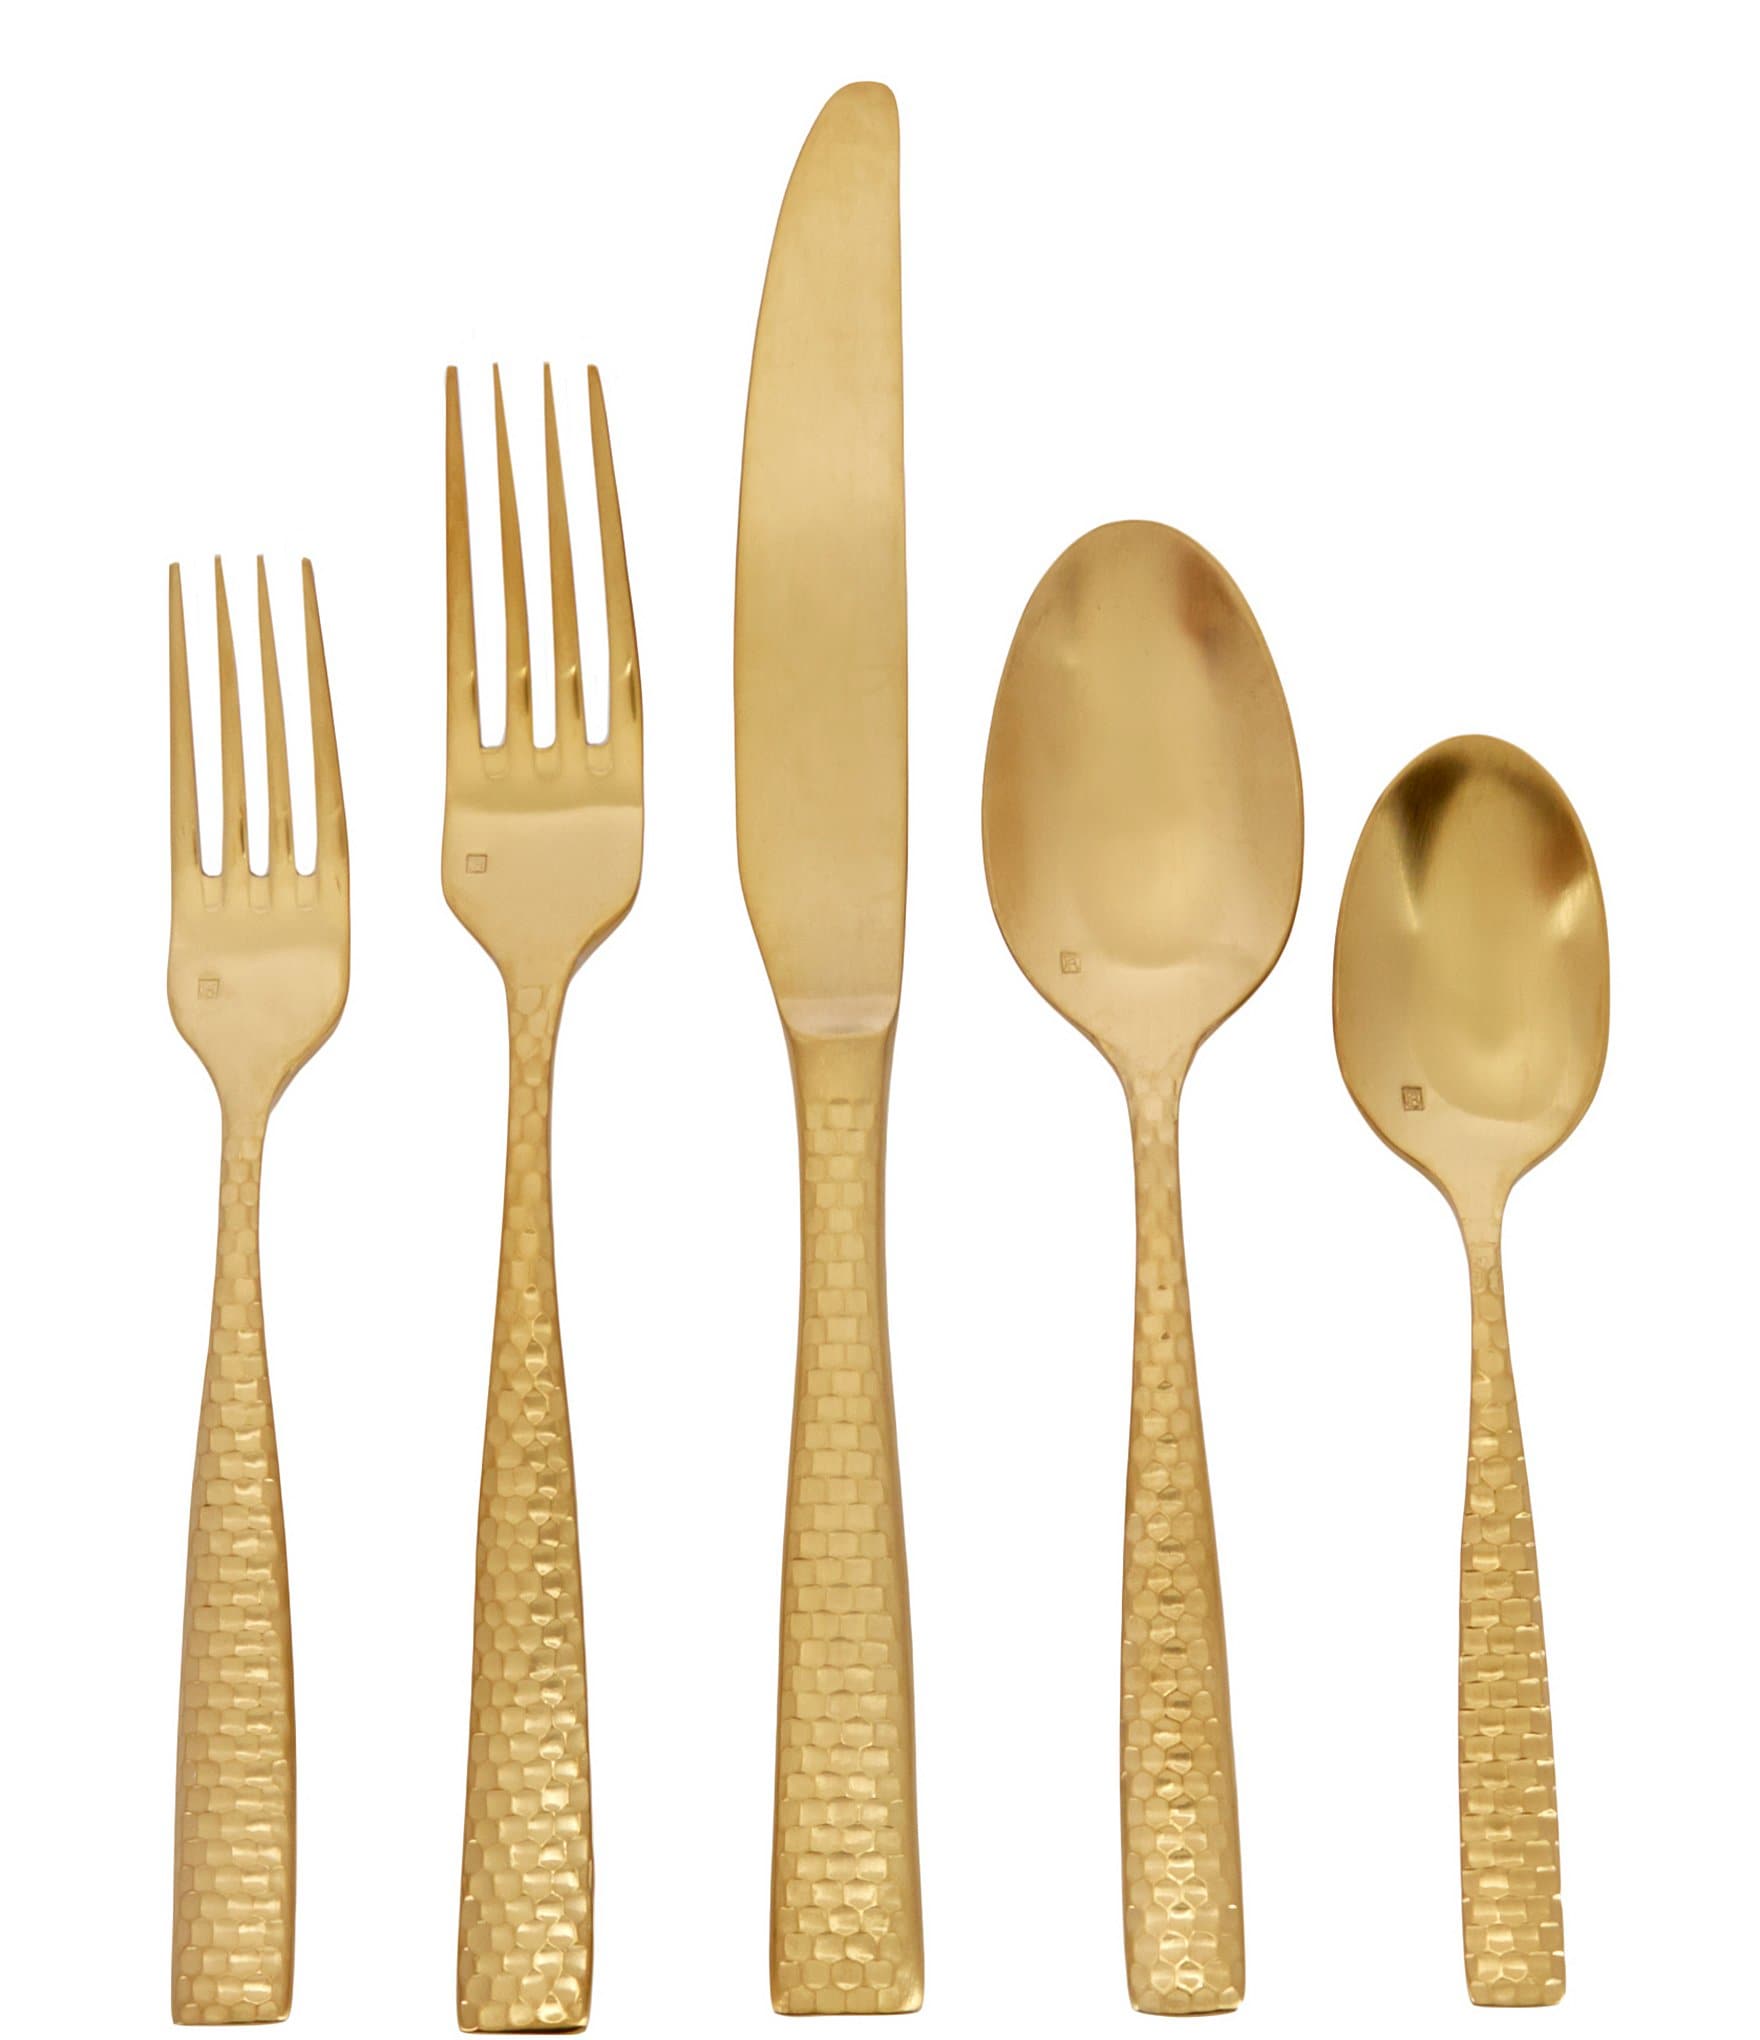 https://dimg.dillards.com/is/image/DillardsZoom/zoom/fortessa-lucca-faceted-brushed-gold-5-piece-stainless-steel-flatware-set/00000000_zi_20378771.jpg